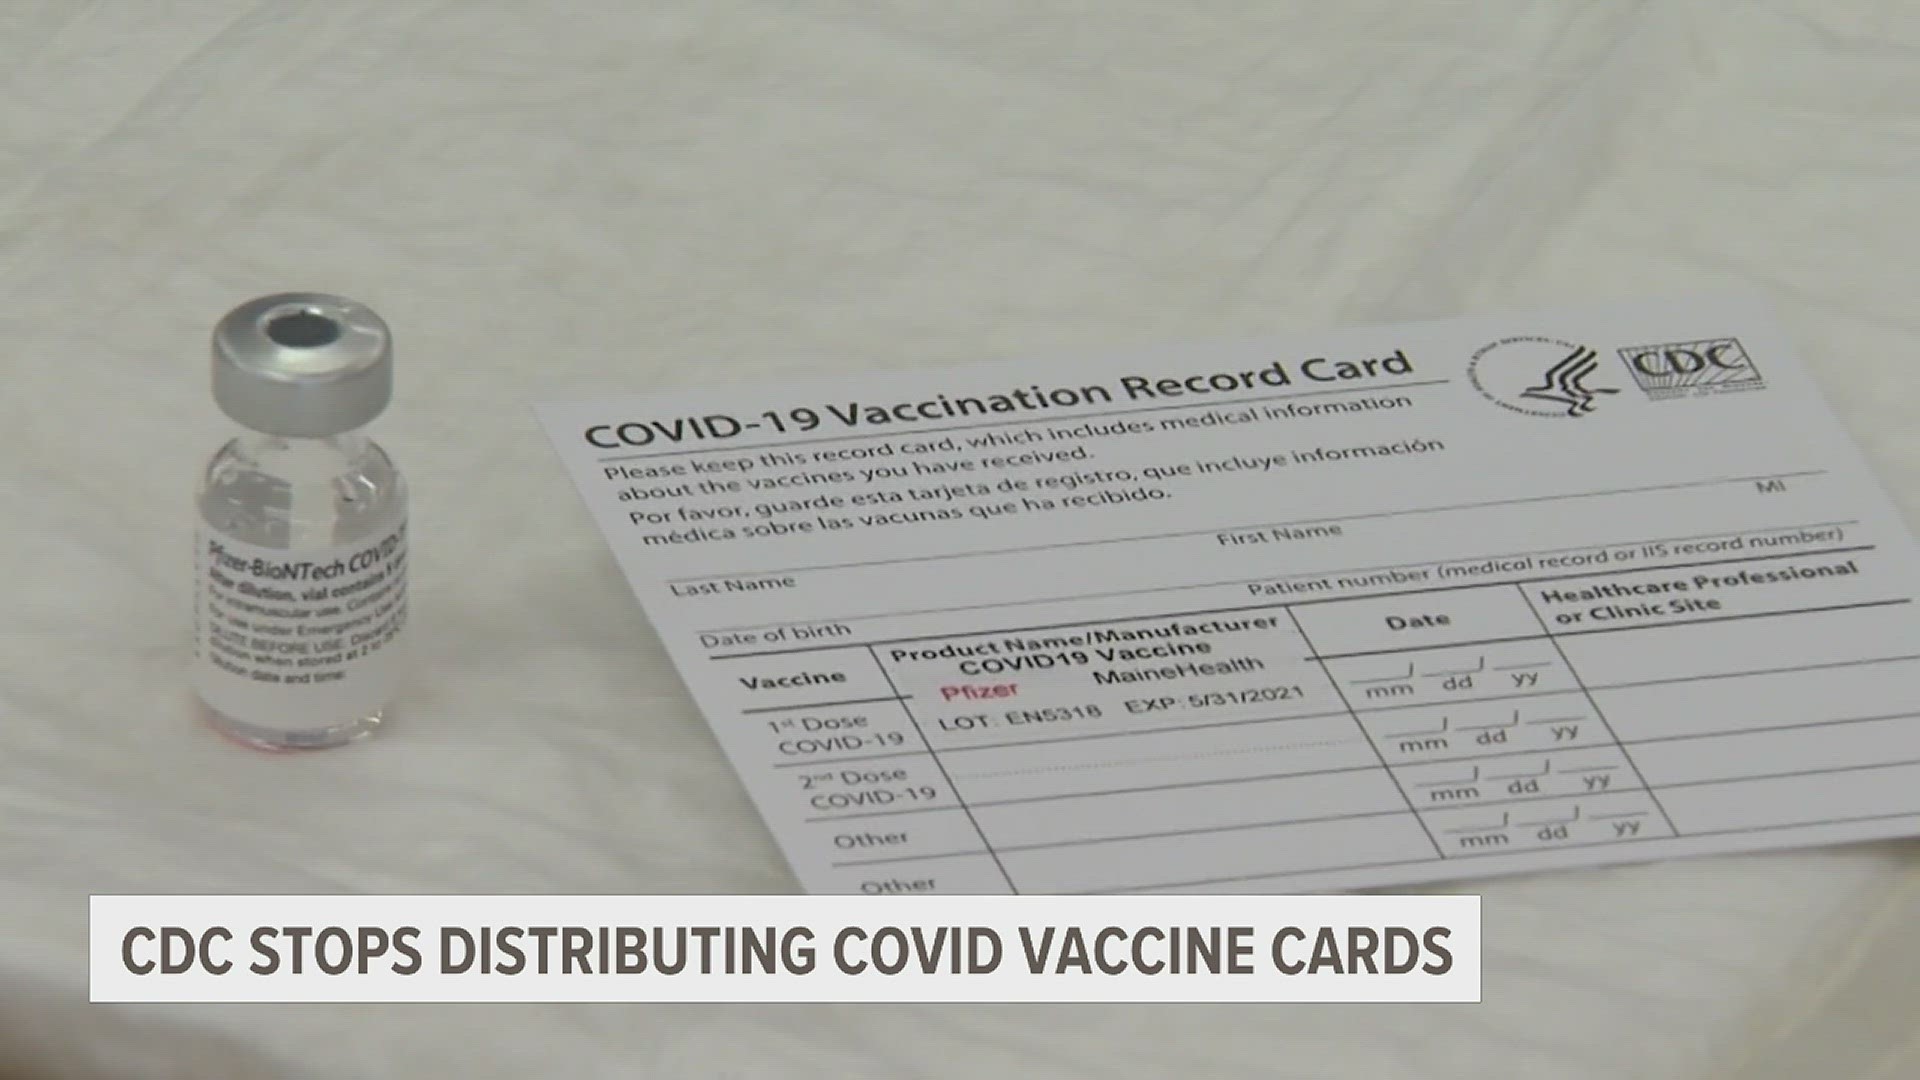 Recently the CDC announced they will no longer distribute COVID vaccine cards. This decision comes after the federal government and other countries stopped re